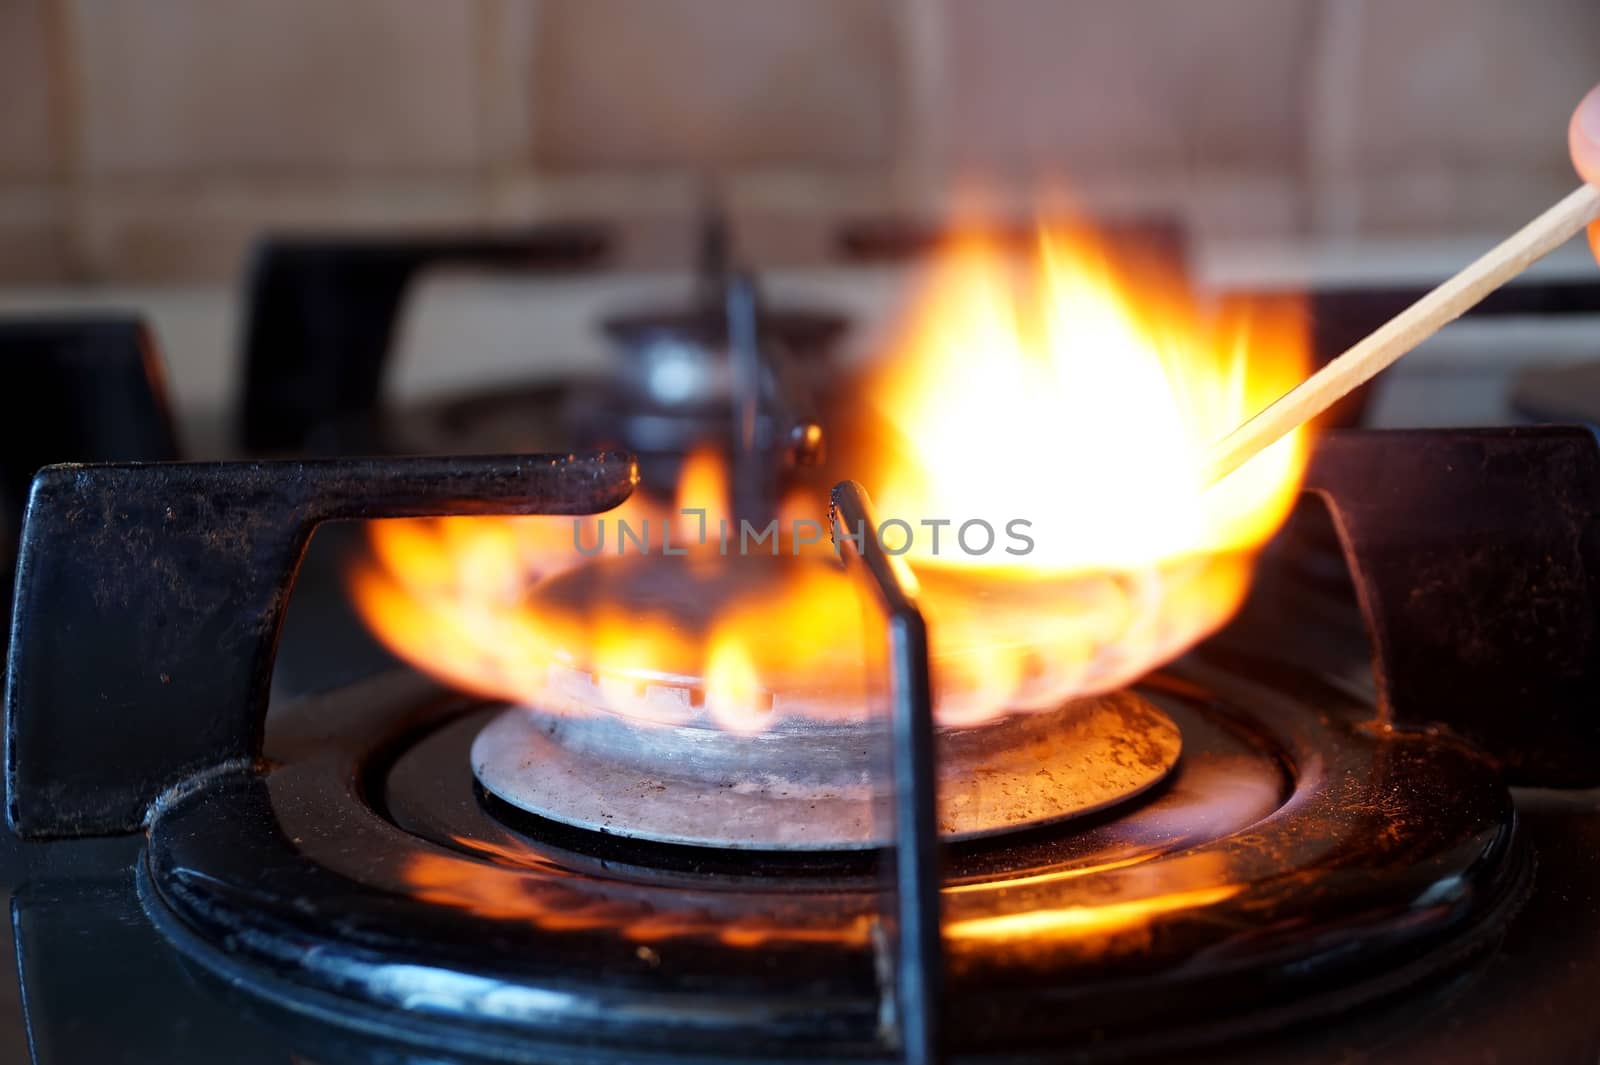 Ignition by a match of a gas ring on the stove